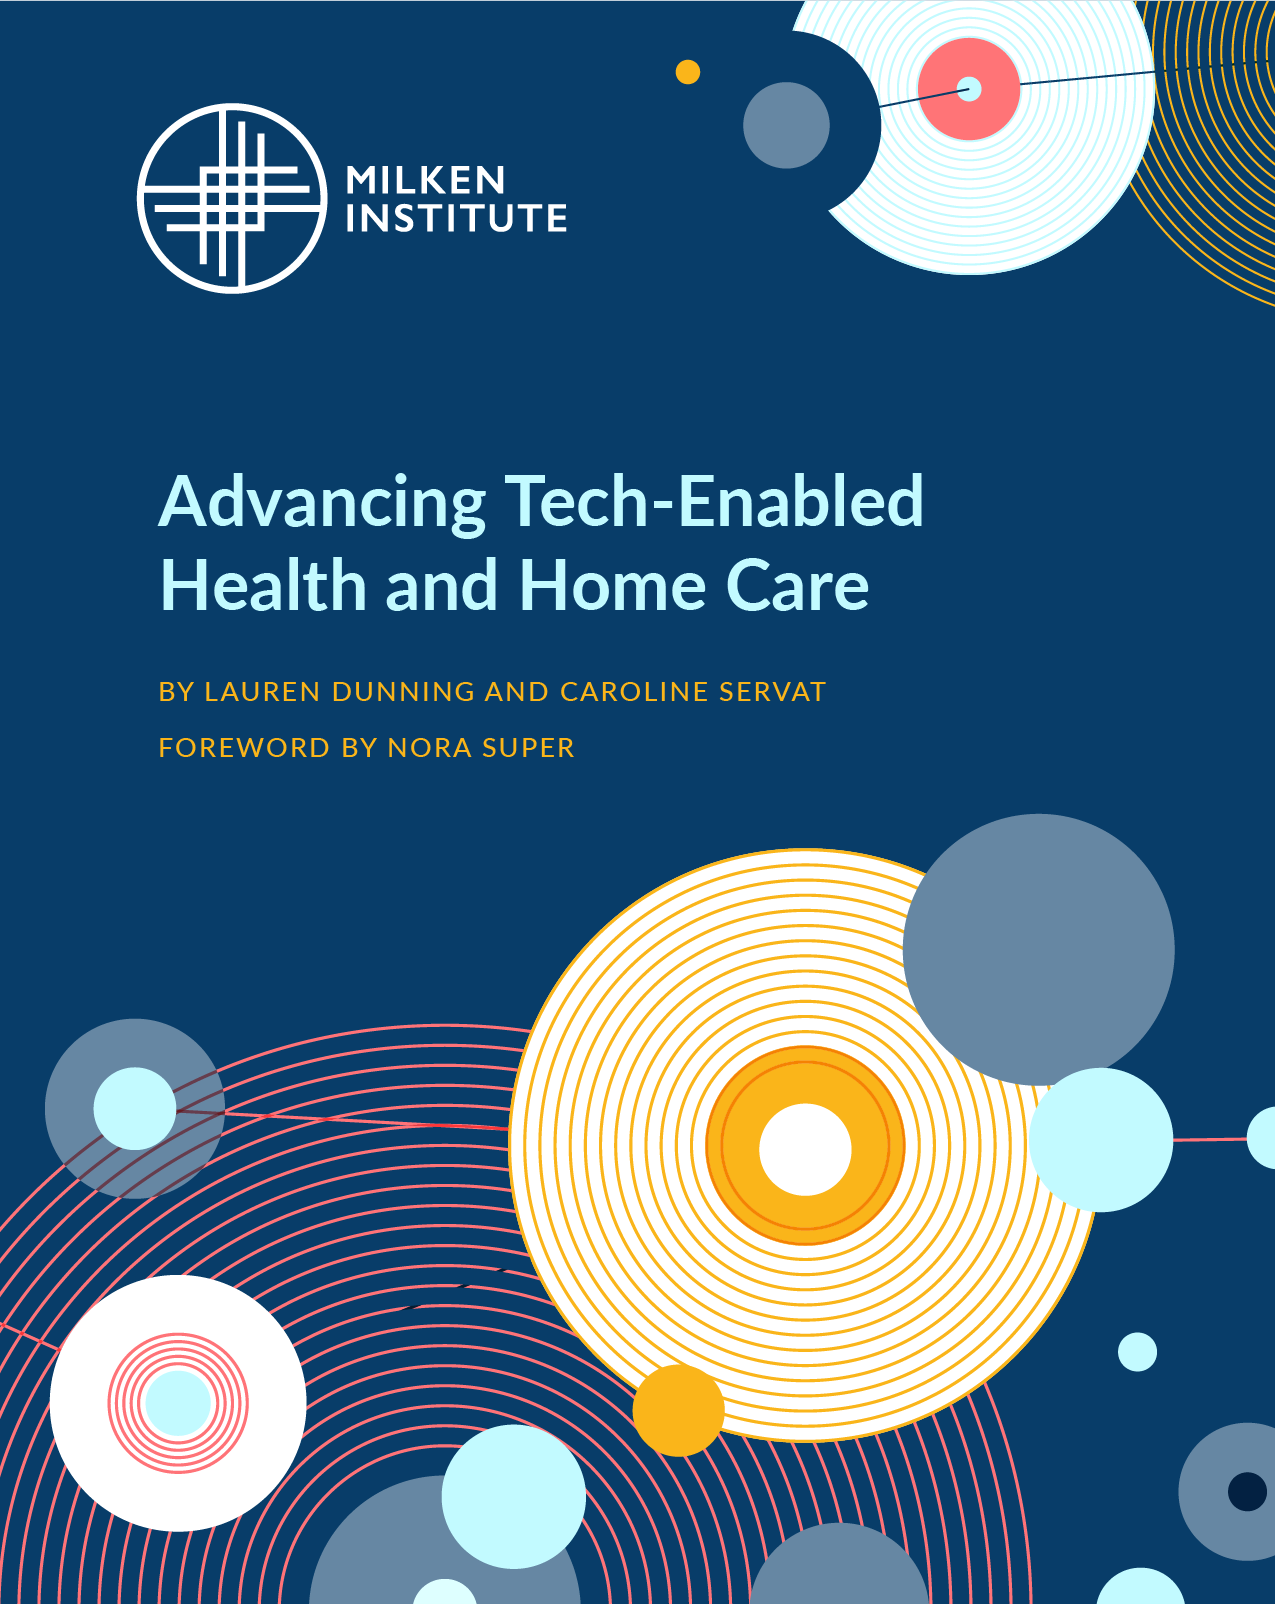 Advancing Tech-Enabled Health and Home Care